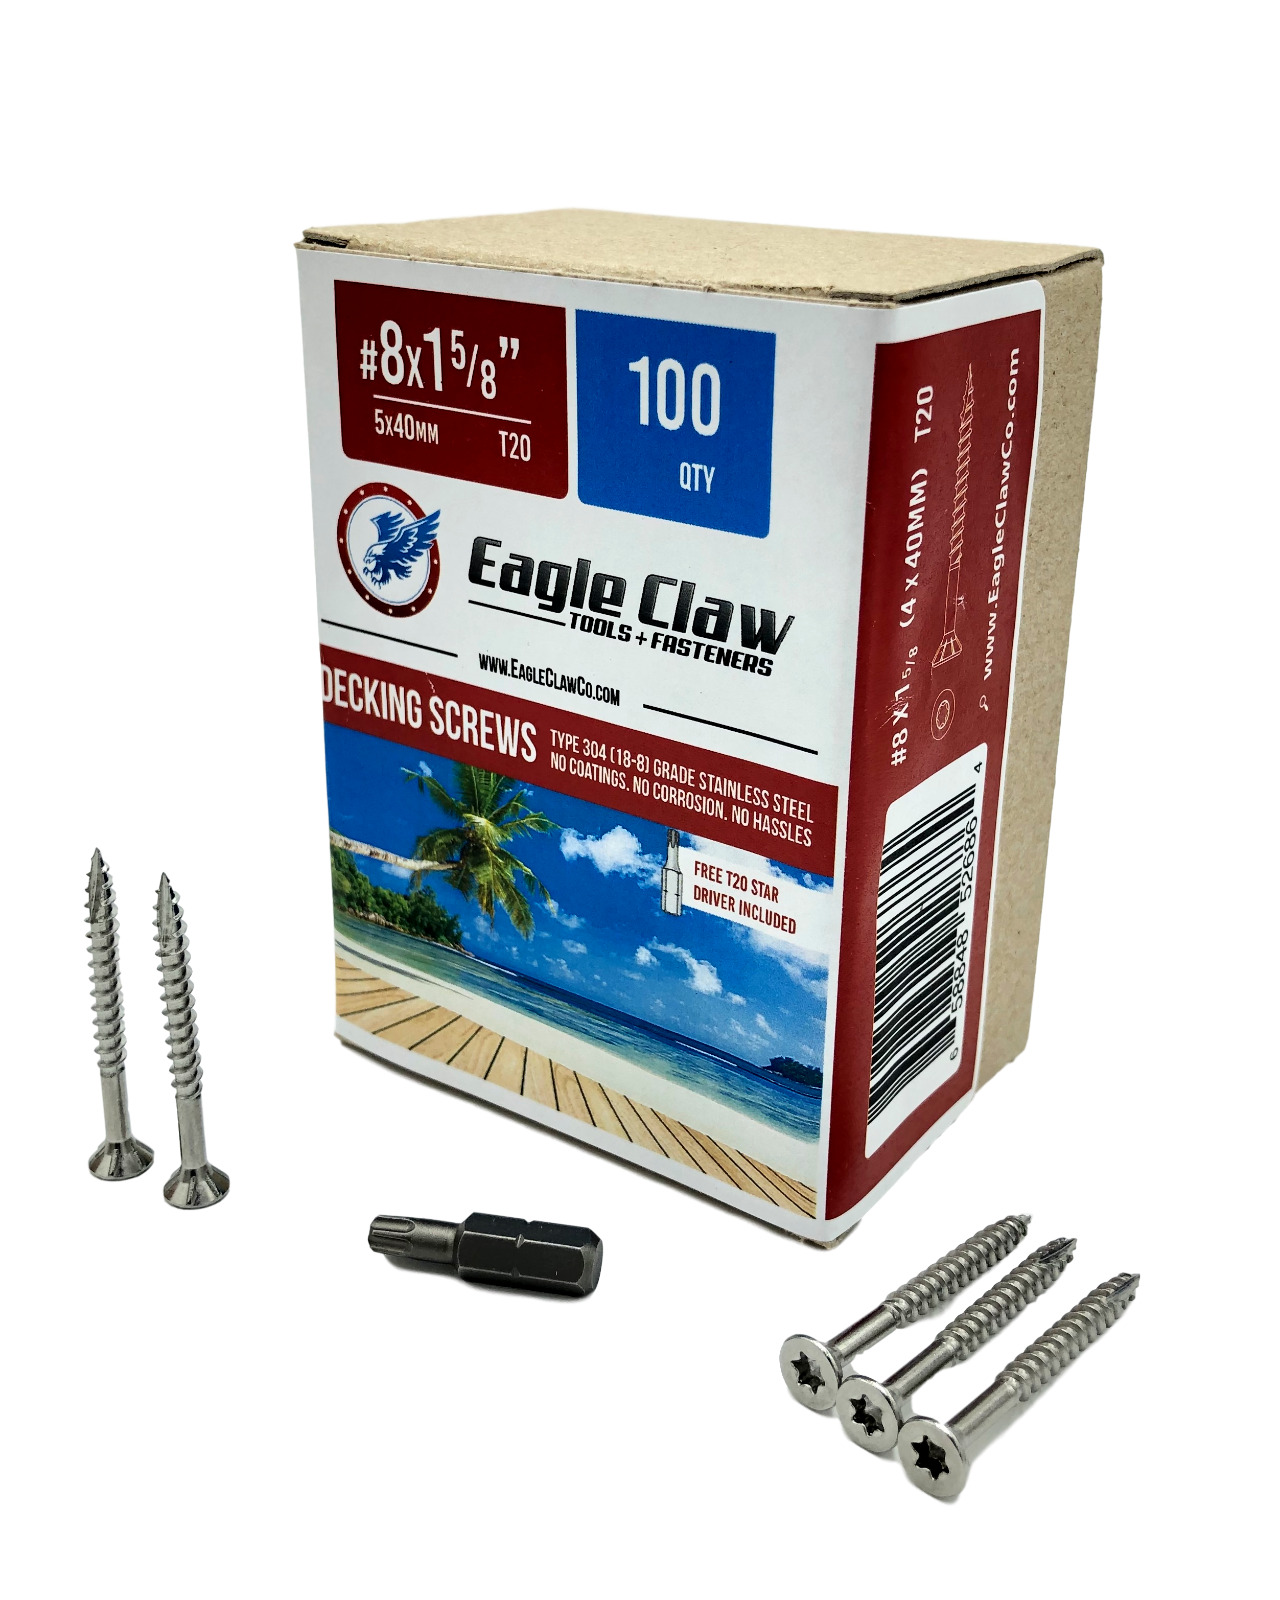 Eagle Claw Stainless Steel Wood Screws Star Drive Flat Head Various Sizes